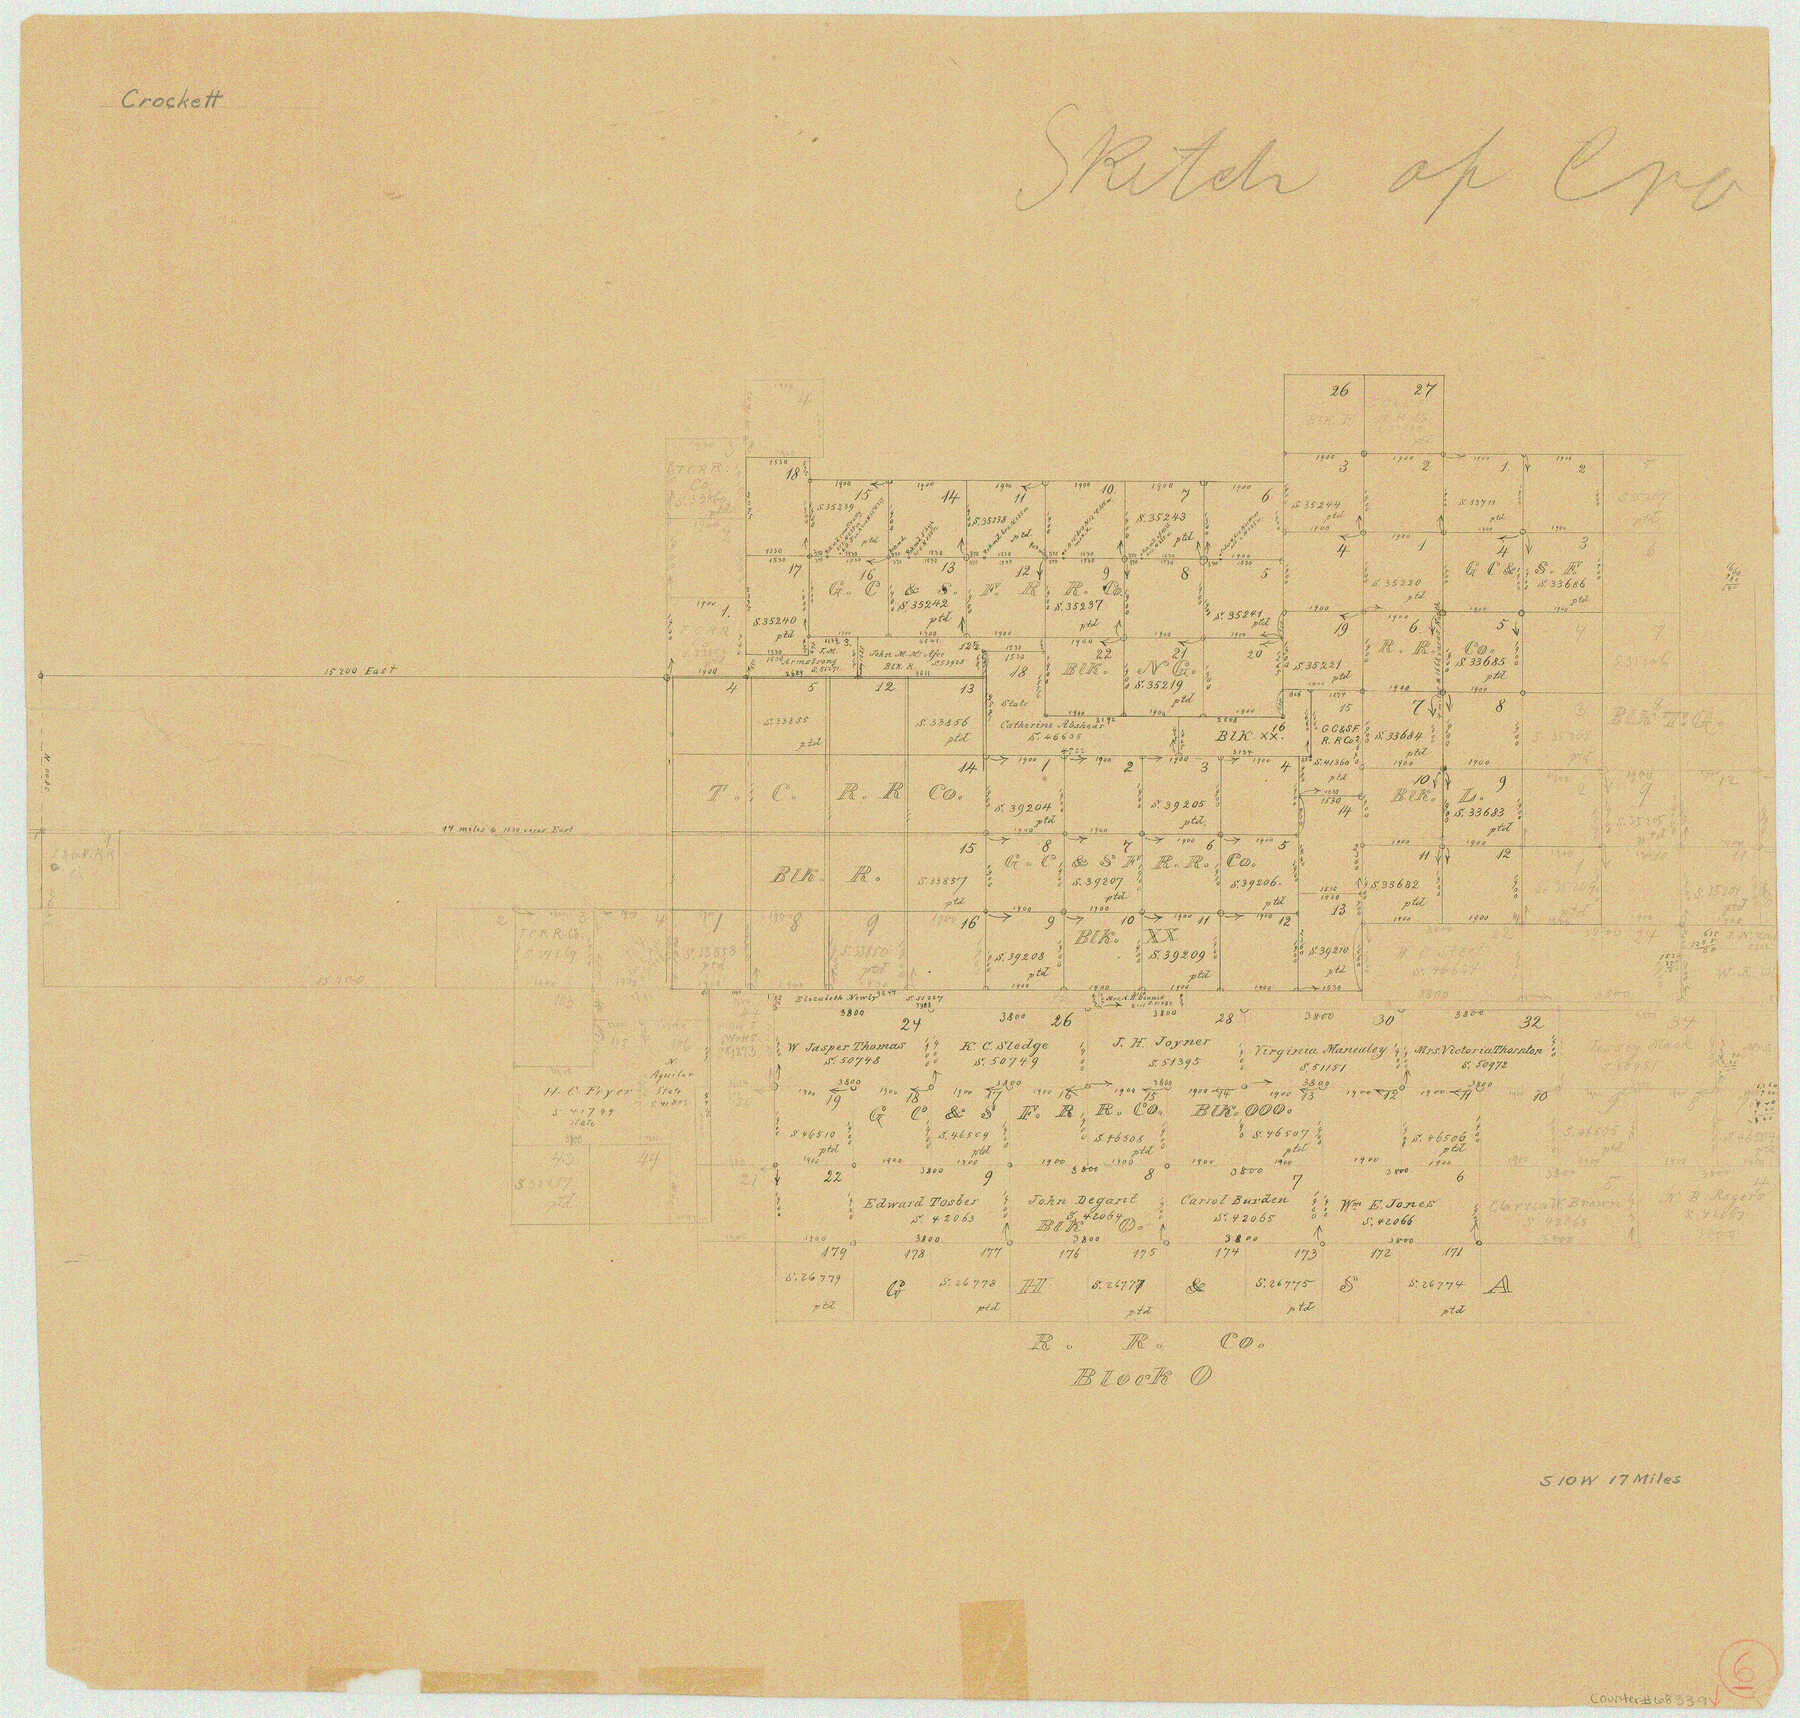 68339, Crockett County Working Sketch 6, General Map Collection